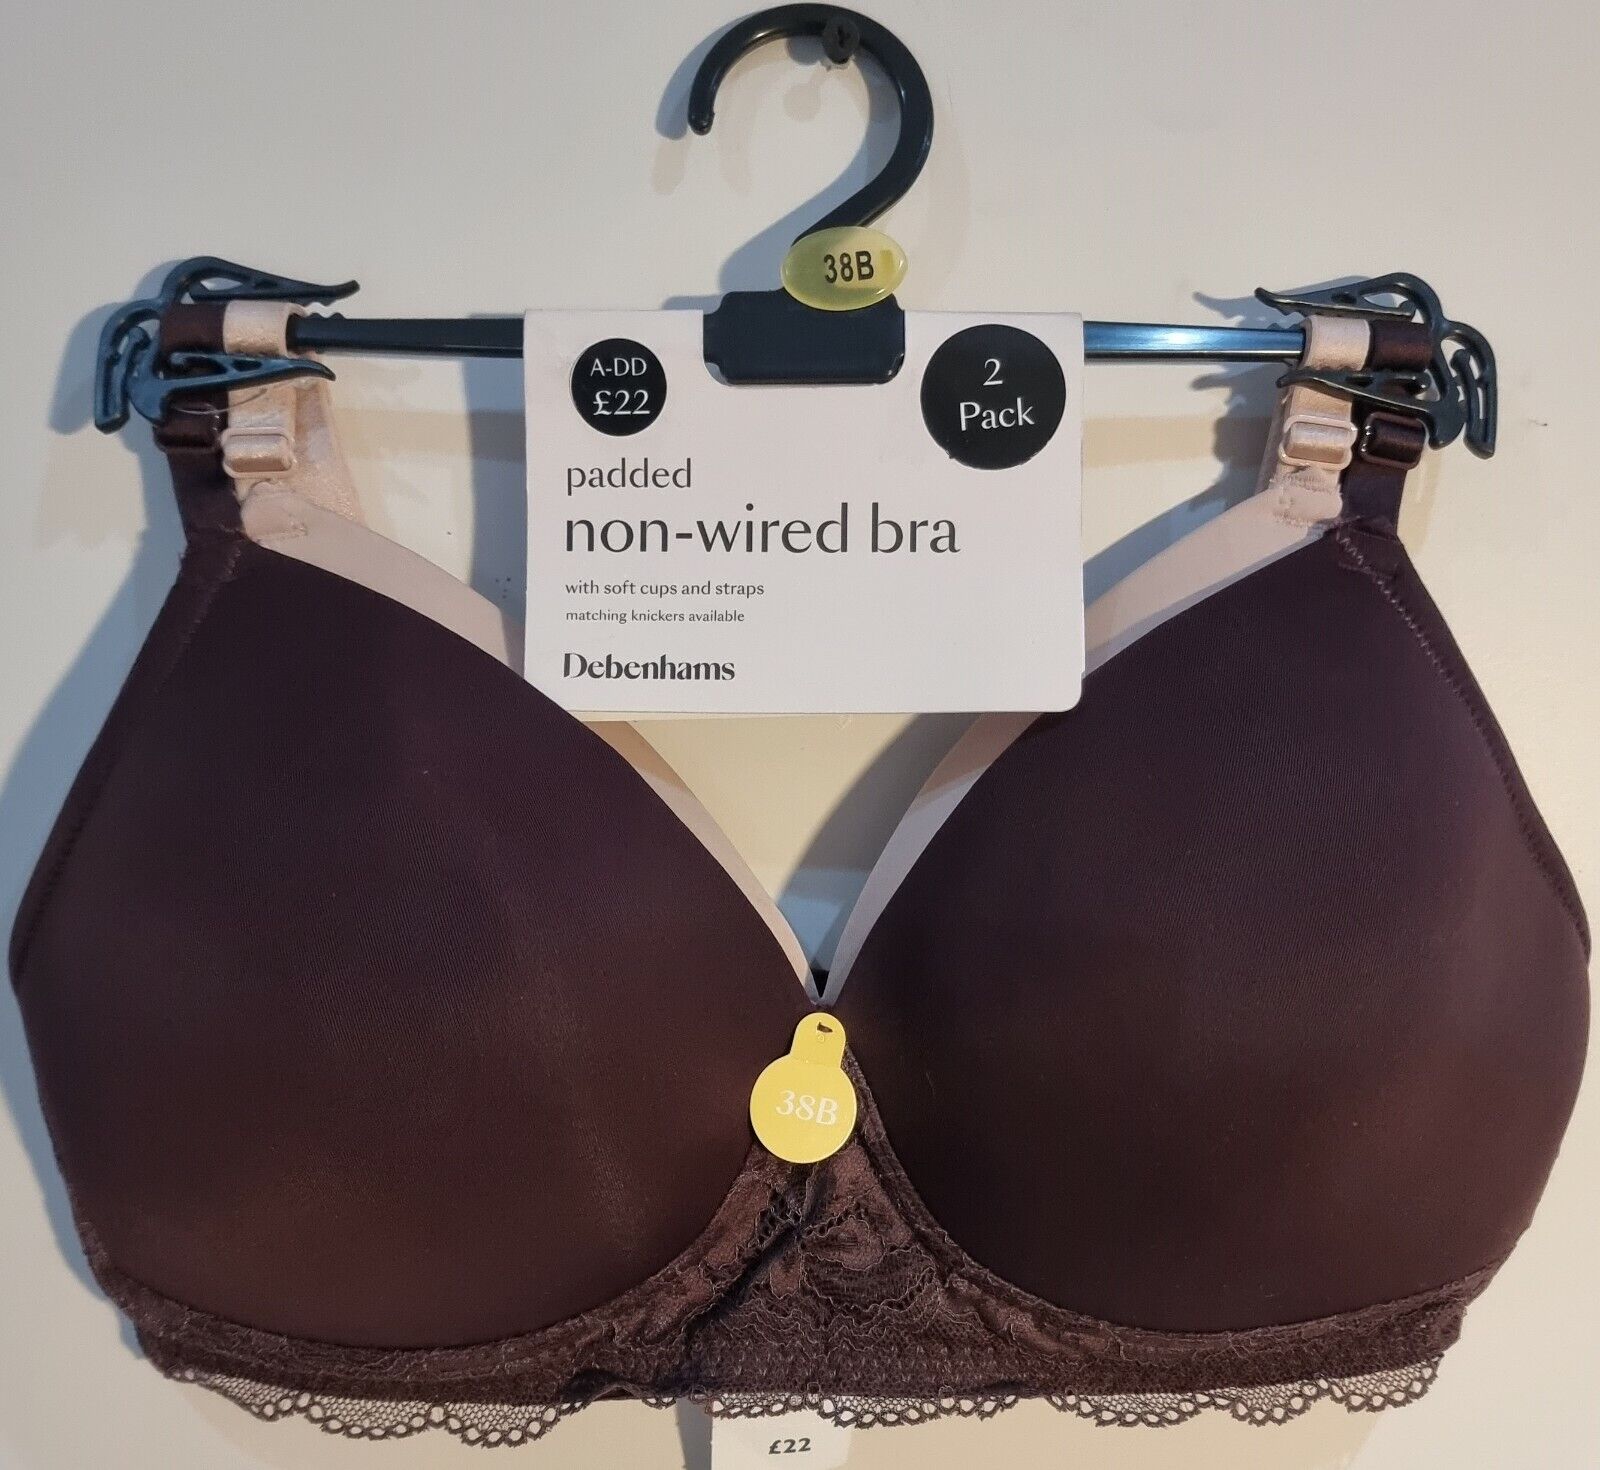 rough Accidental Abandonment DEBENHAMS Padded Non-Wired Bra 2PP Core Lace 38B BNWT RRP £22 Chocolate &  Pink | eBay